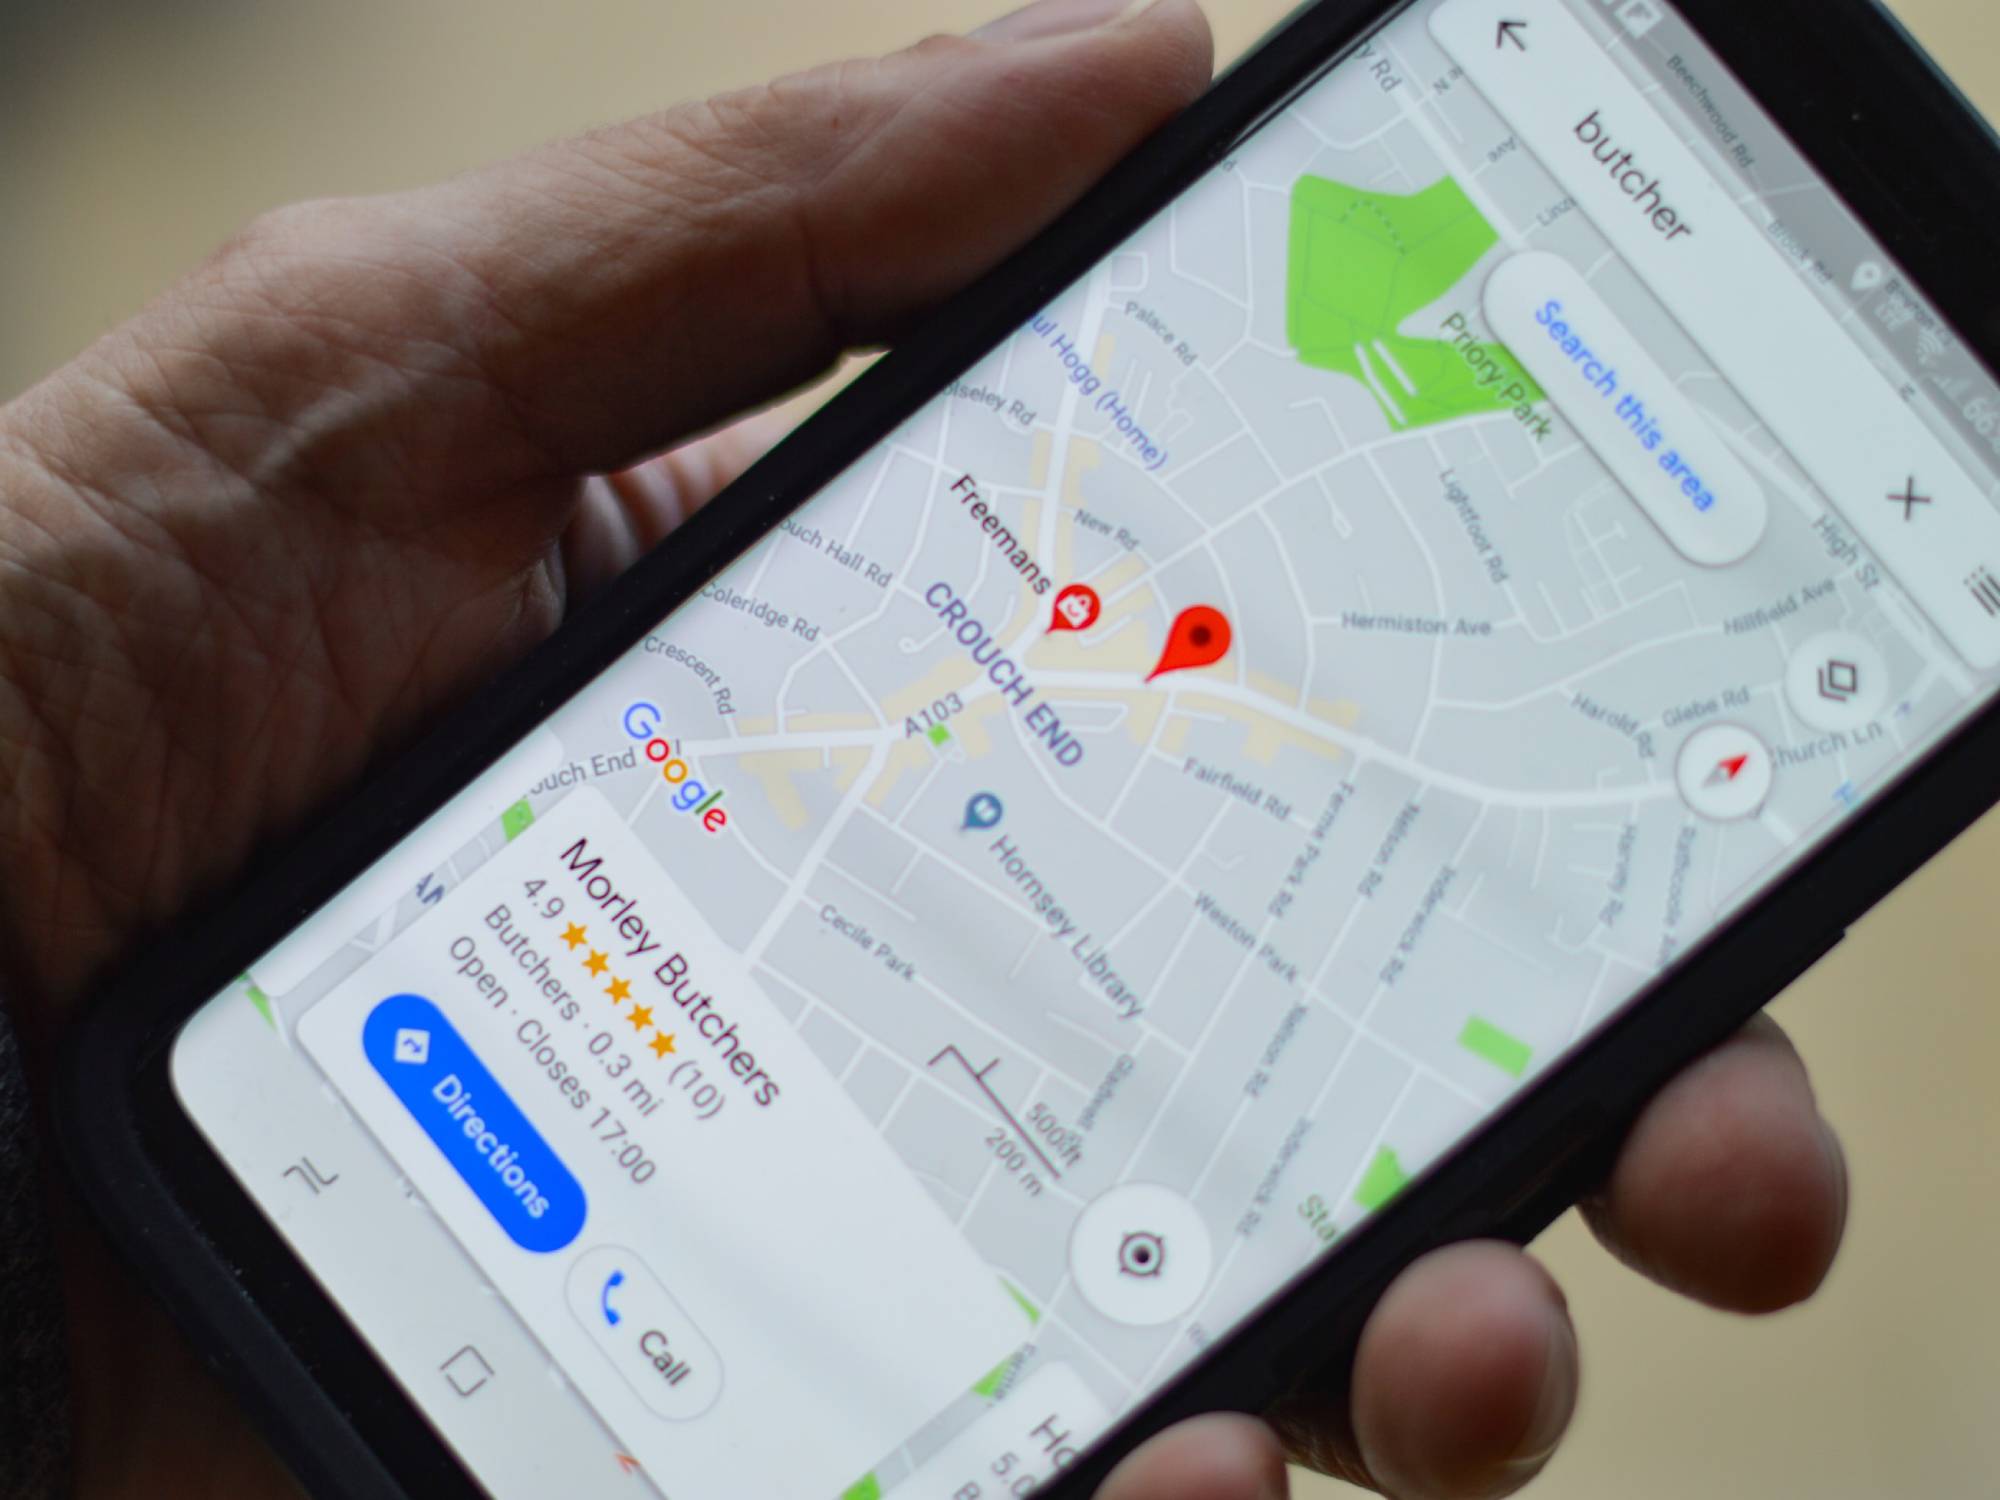 8 tips for navigating Google Maps like a pro